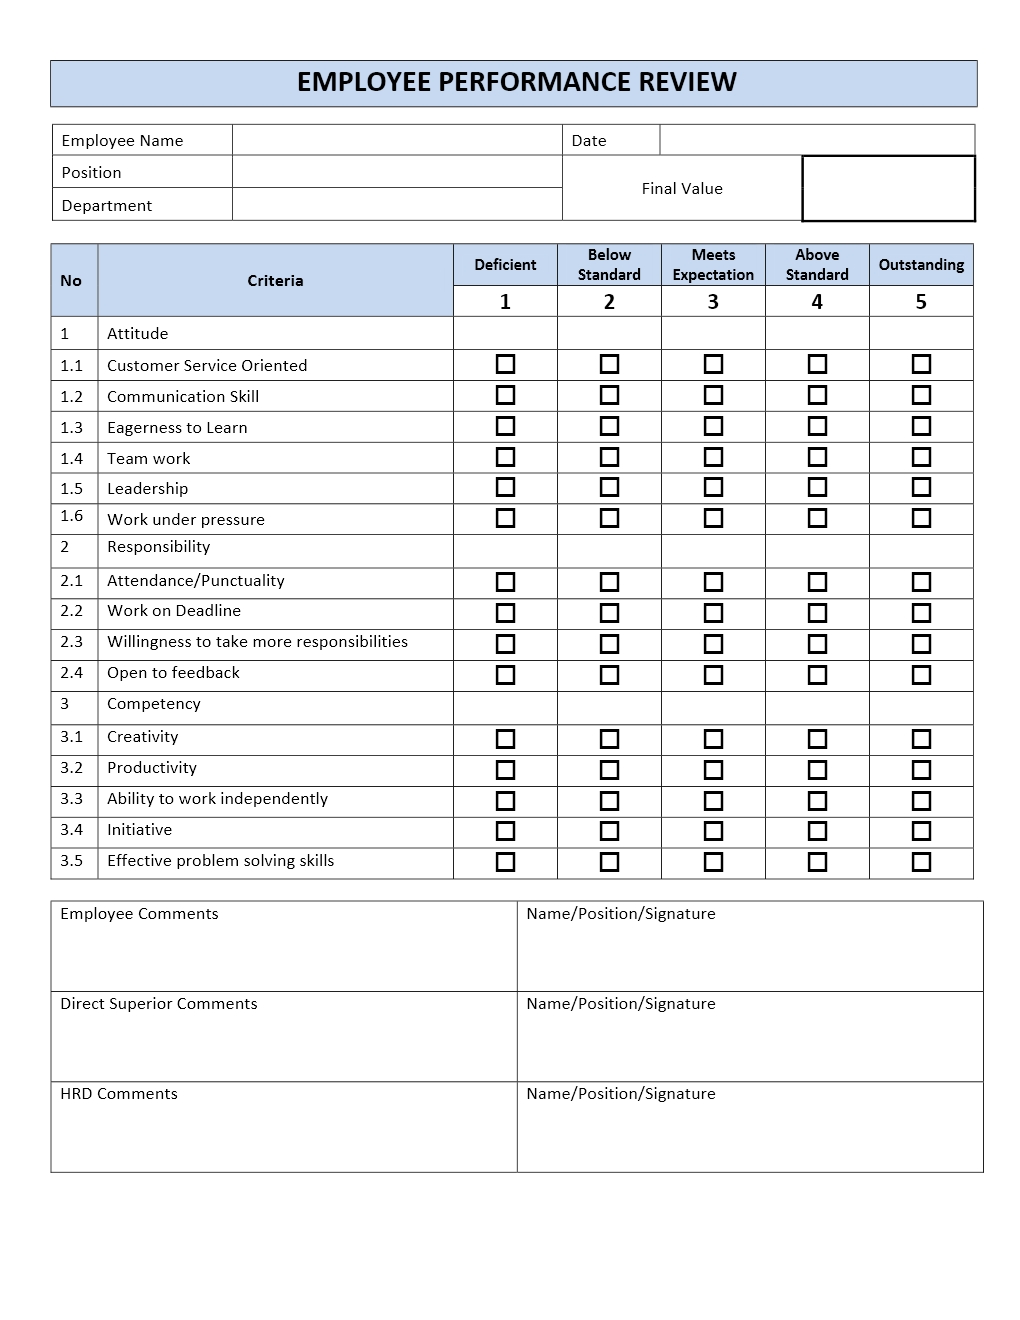 download-performance-review-examples-07-evaluation-employee-employee